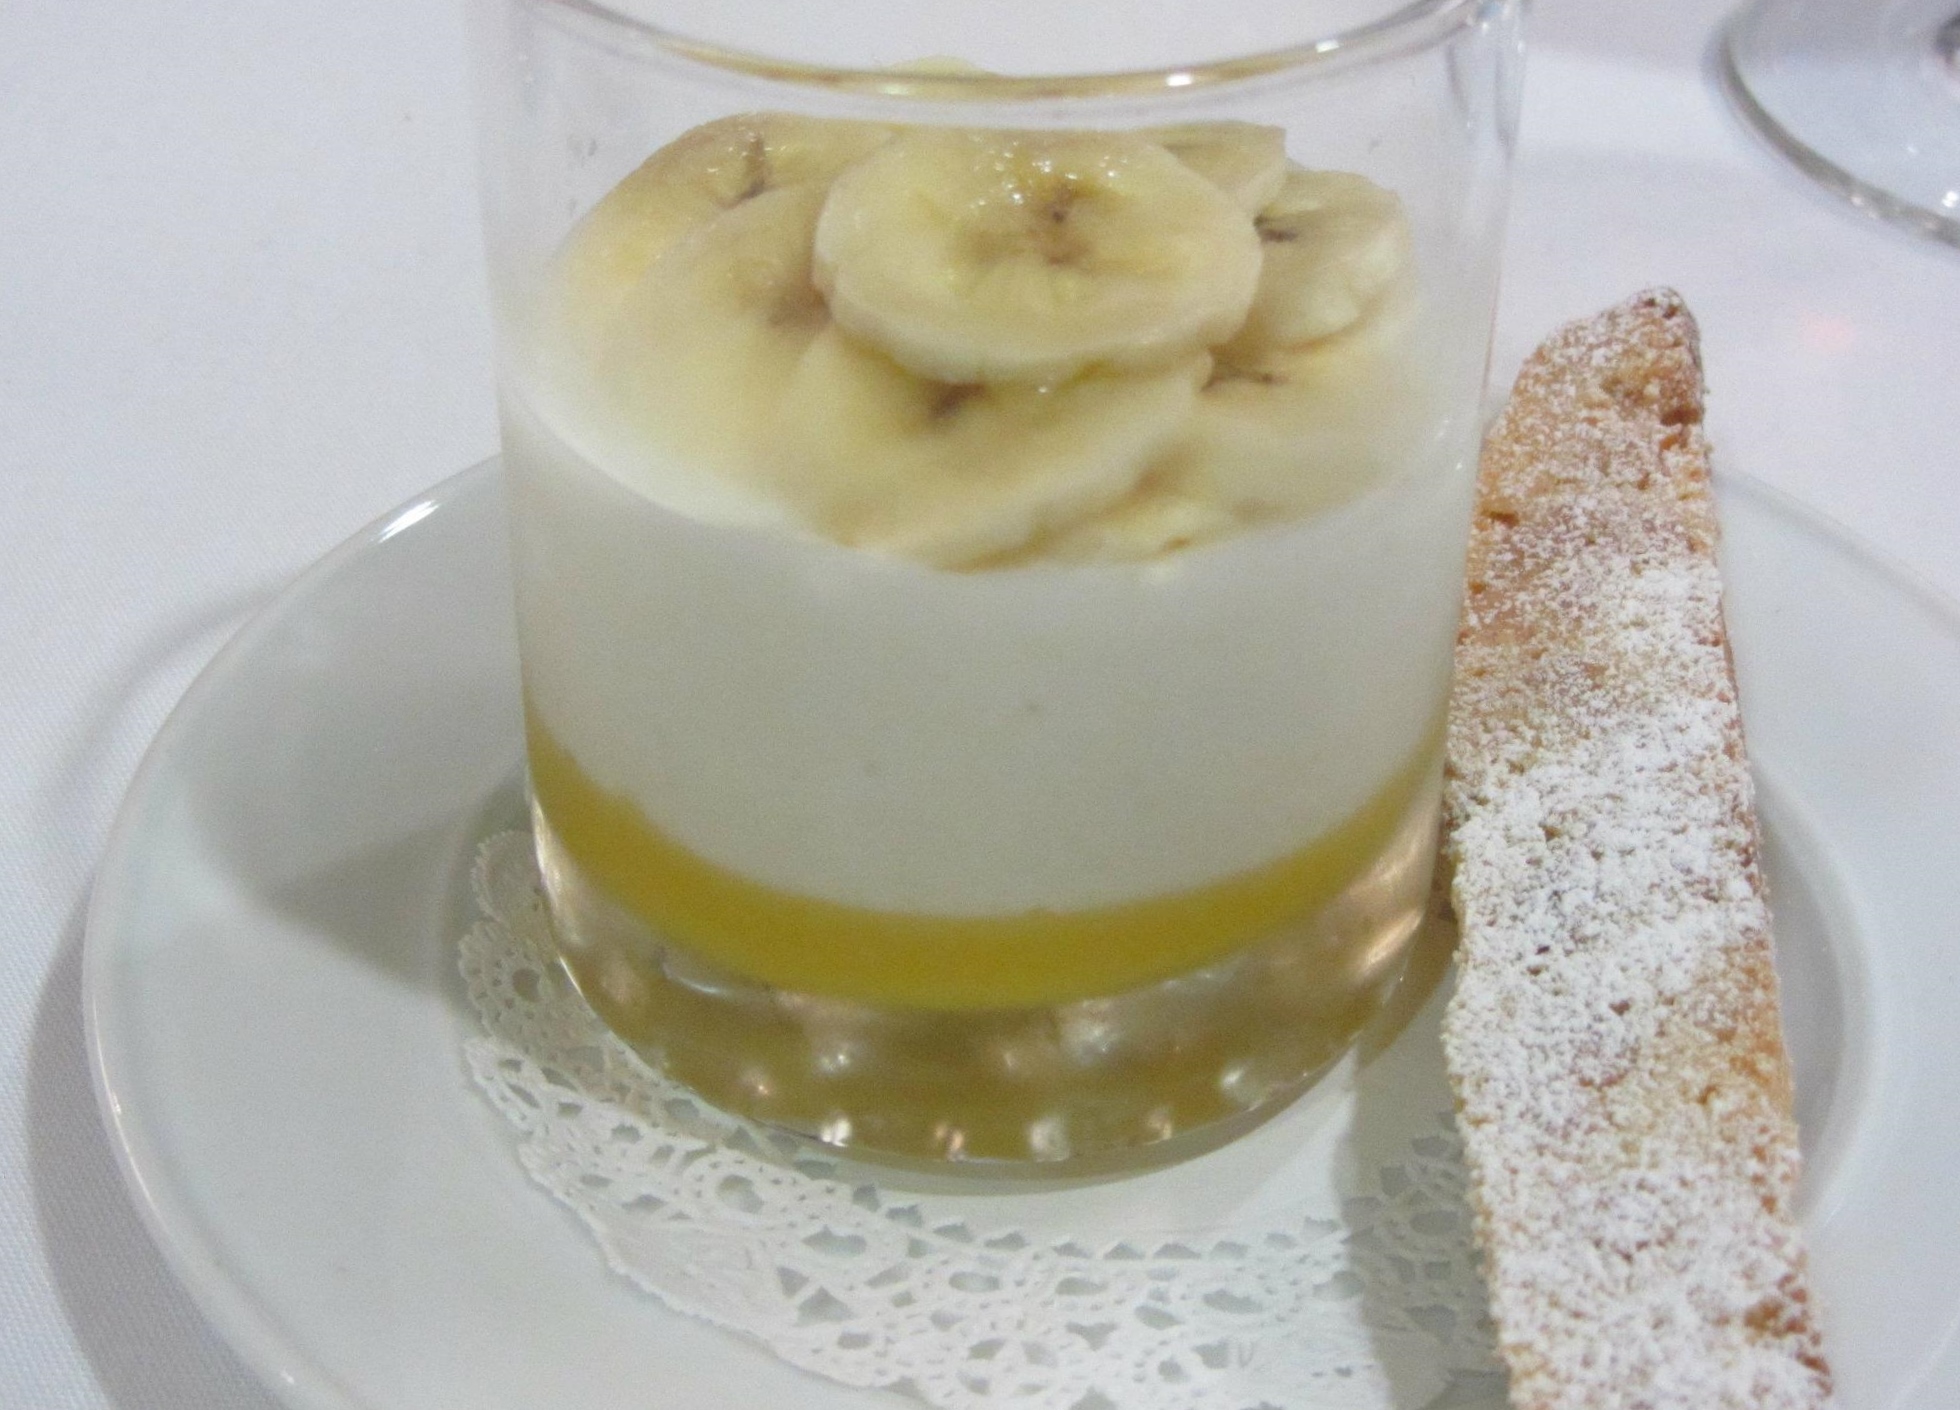  Panna cotta with passionfruit curd and banana-macadamia biscotto